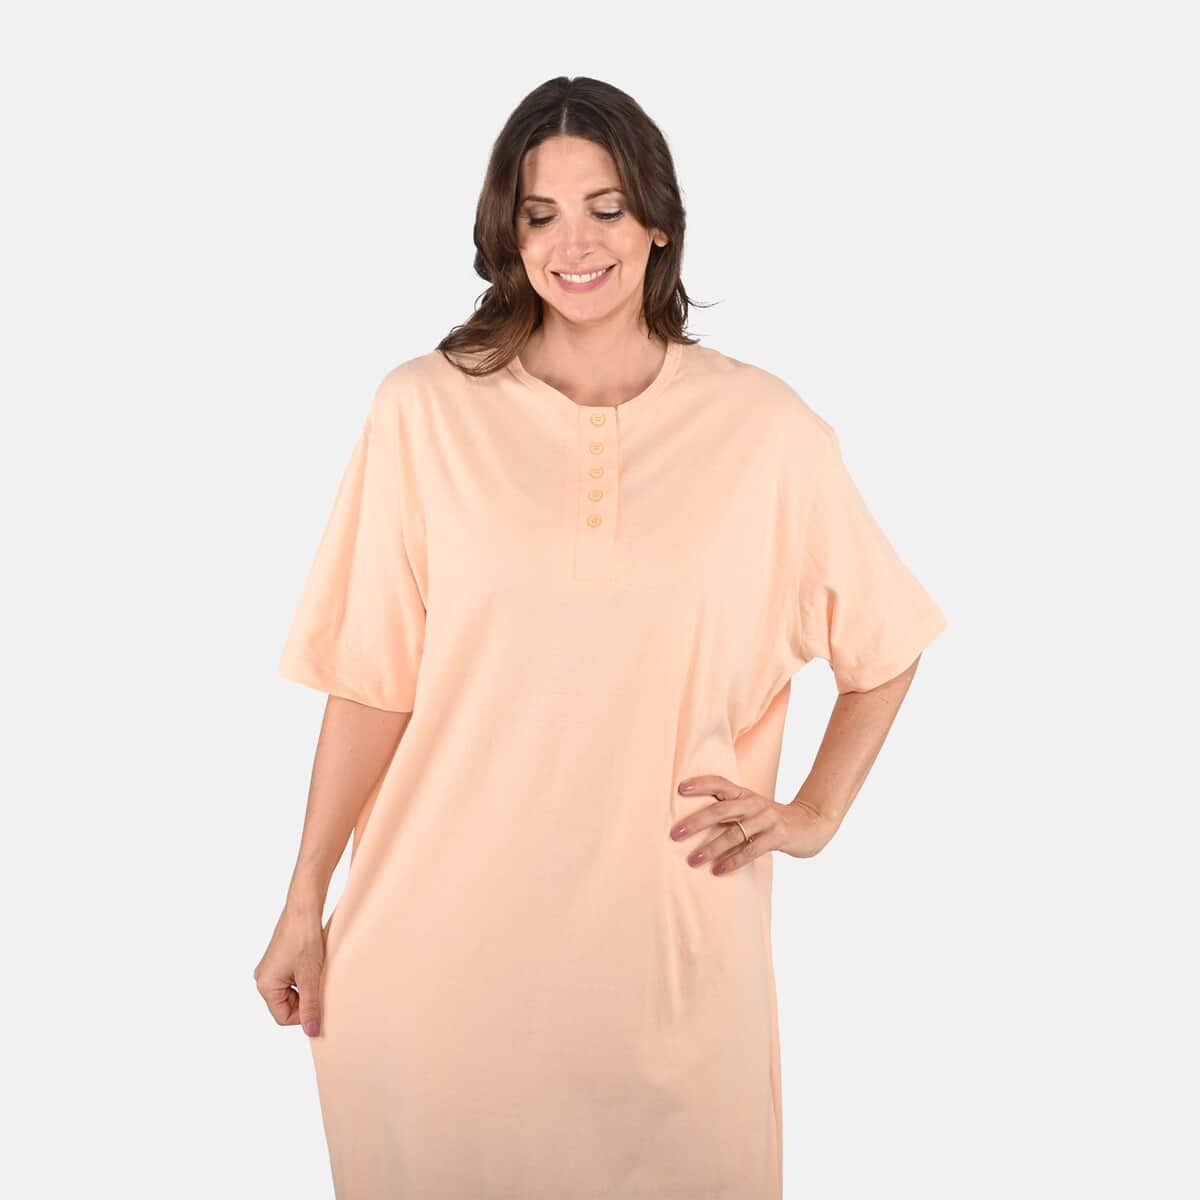 COZEE HOME HOODED LOUNGER SOFT LADIES AMAZING DRESS size: M